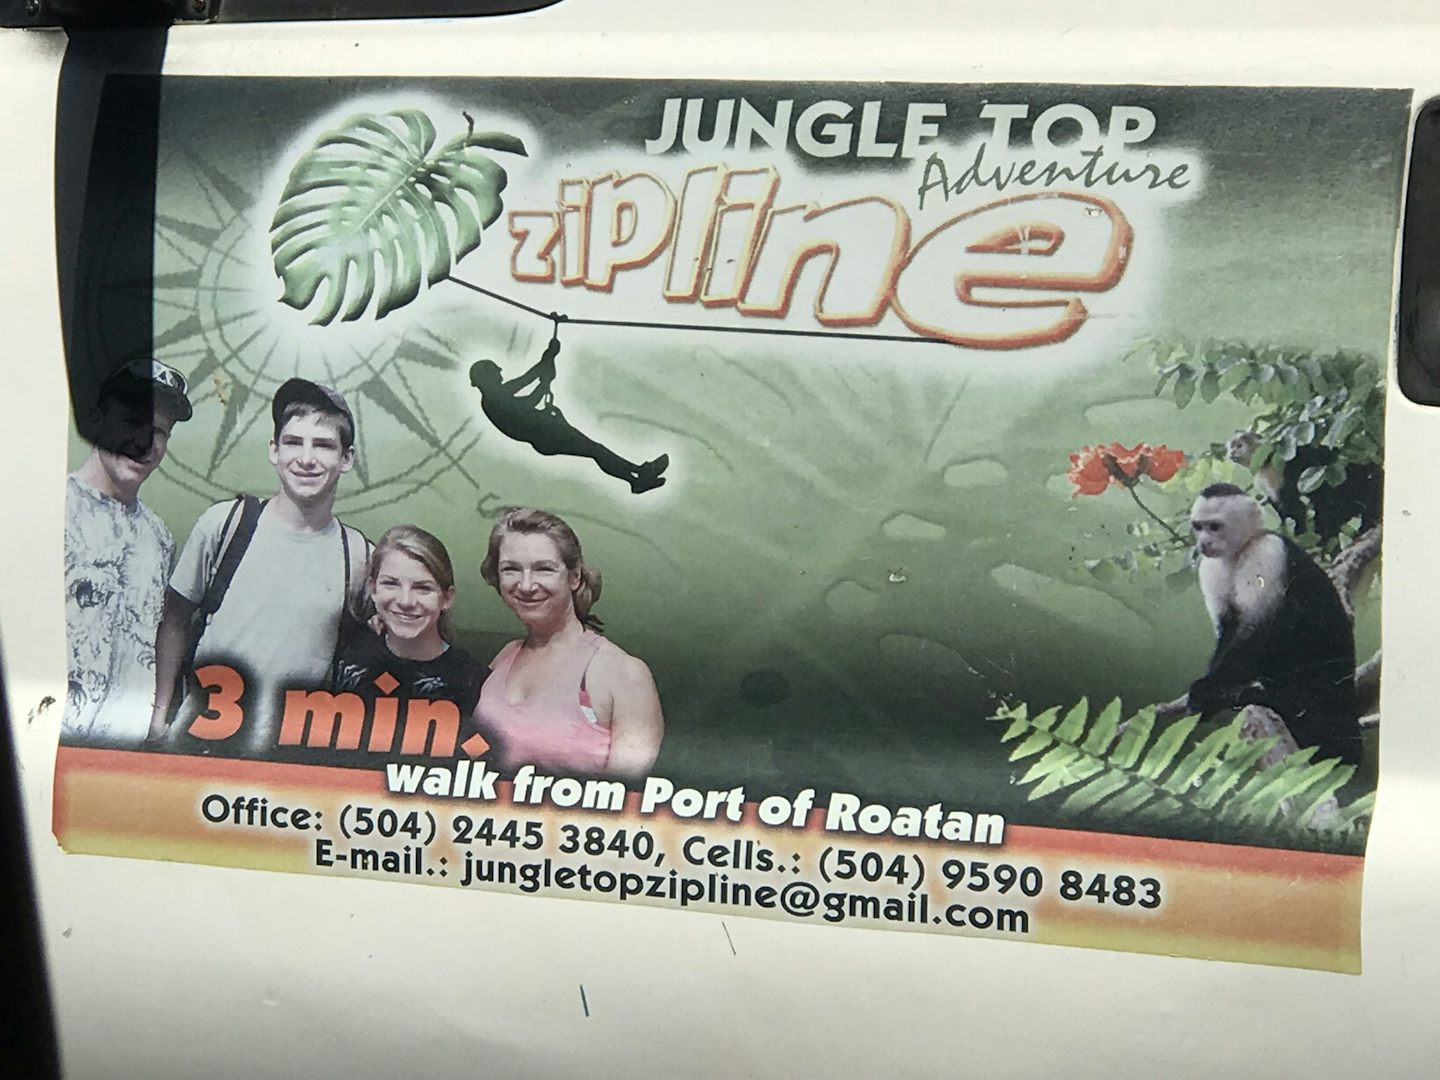 Who we book for zip lining. A must in Roatan.